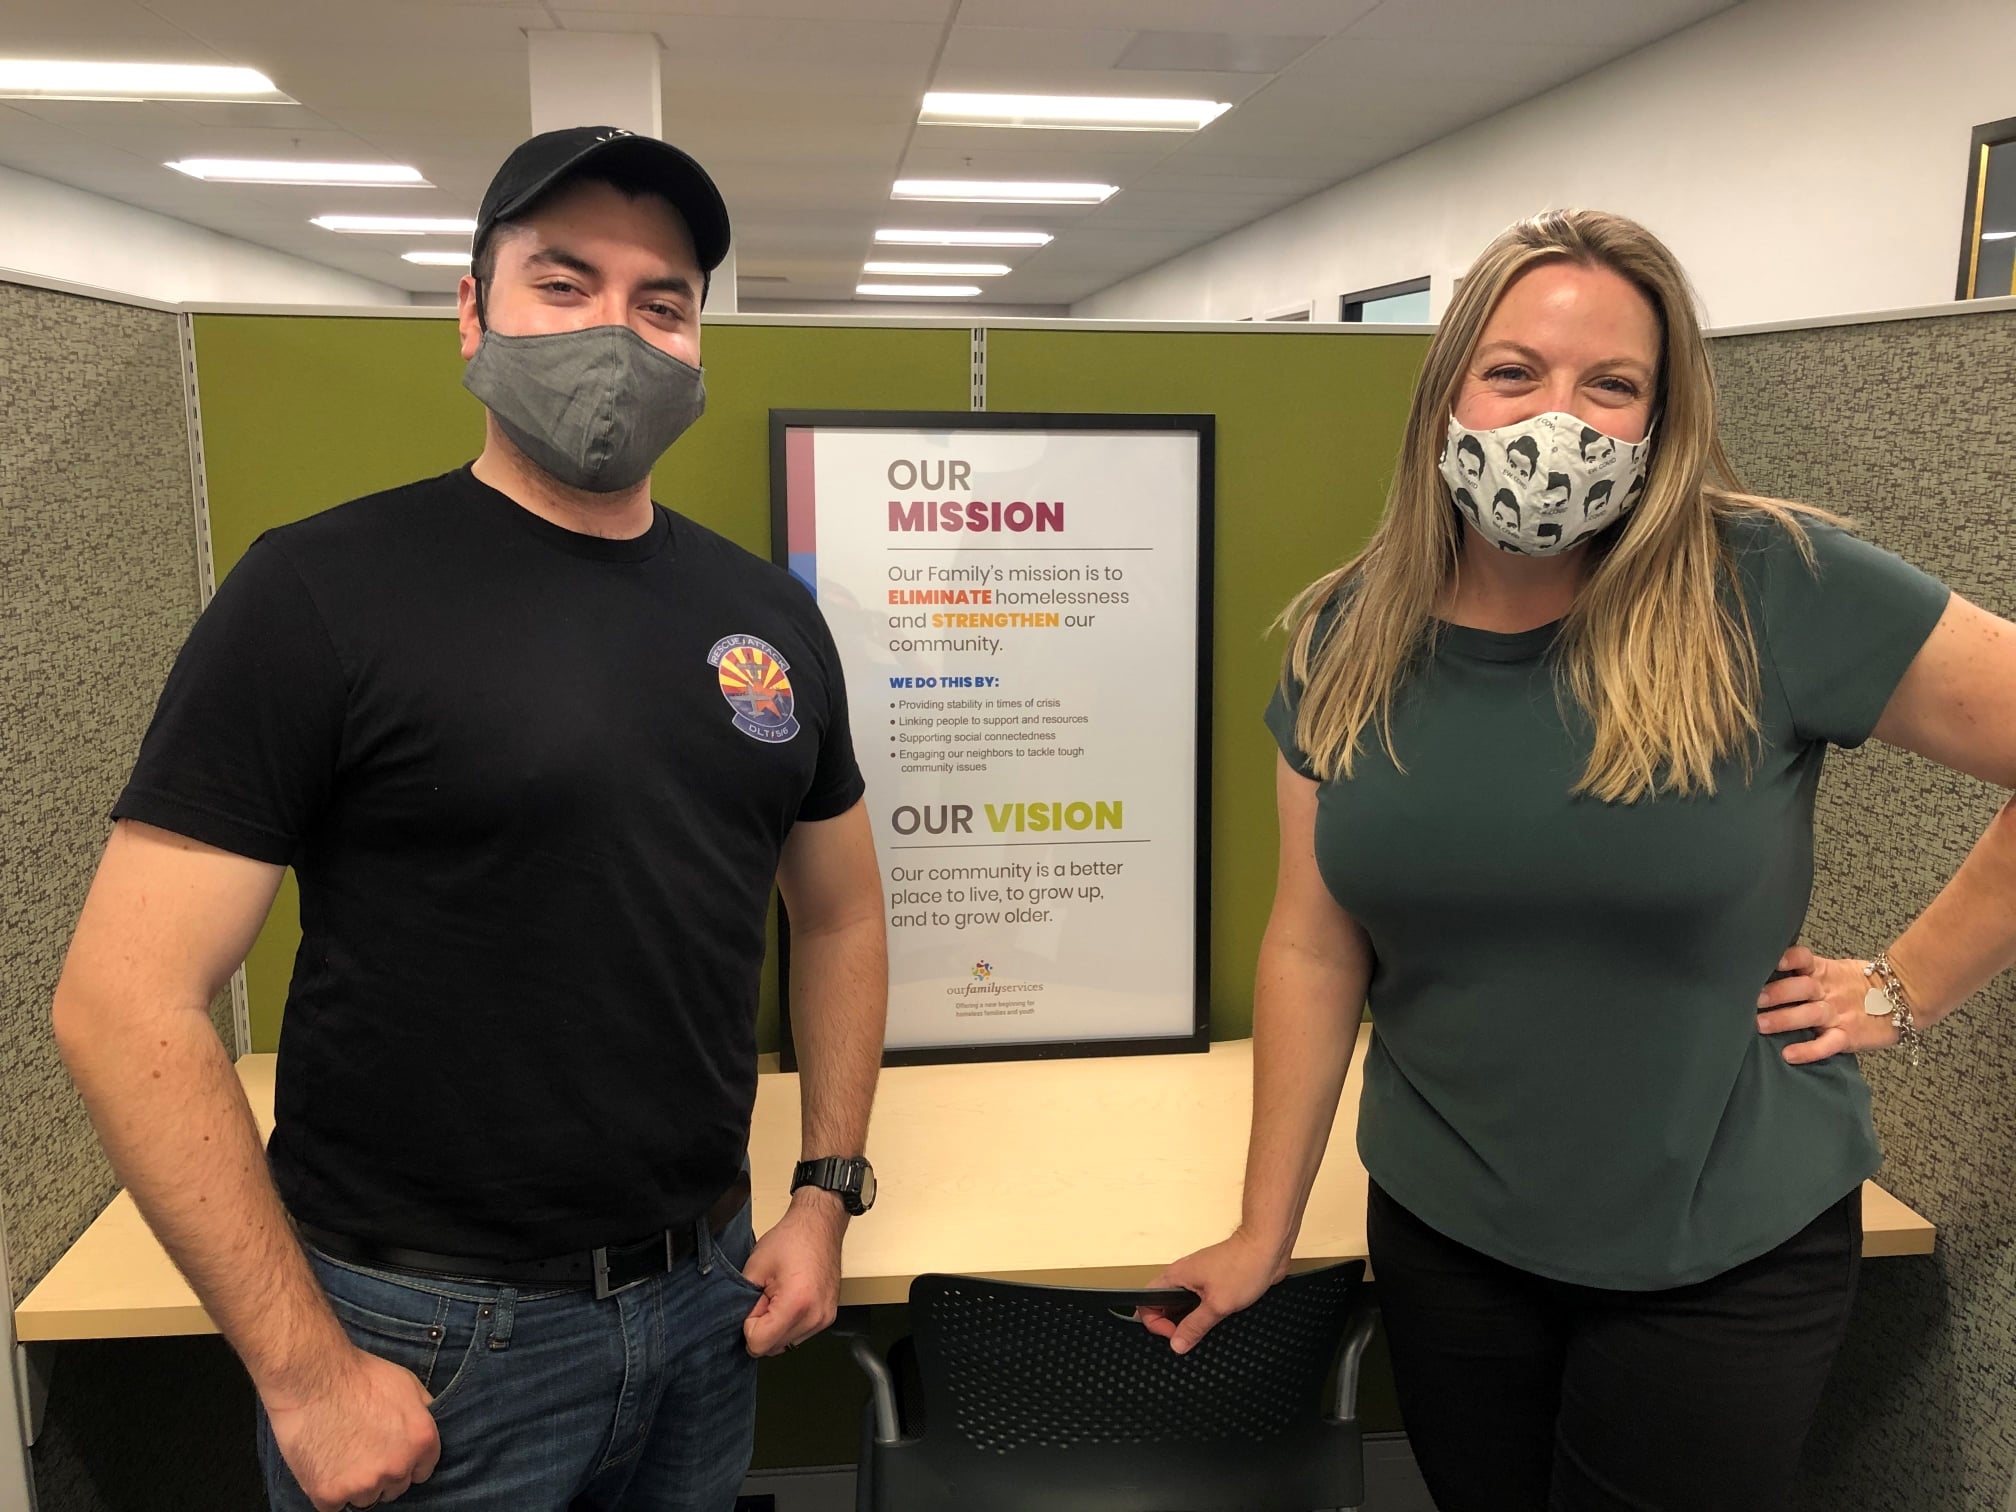 Staff Sergeant Javier Ortega and Our Family Services Grant Writer Sarah McNamara smile at the camera. Both are wearing face masks.